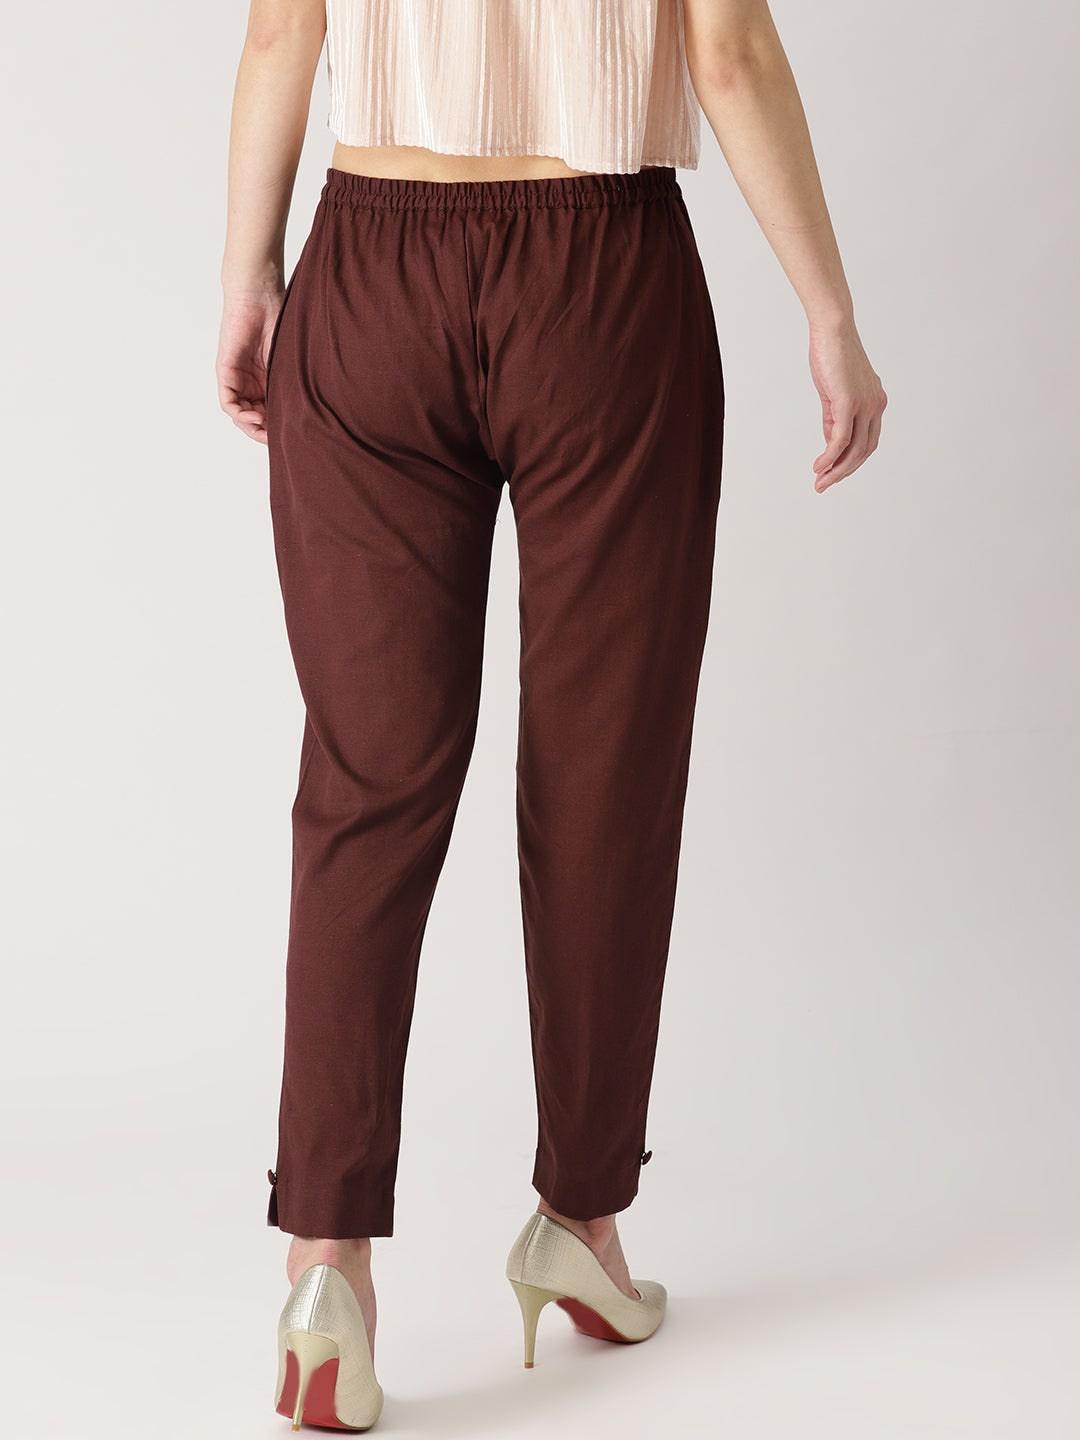 Brown Solid Cotton Trousers